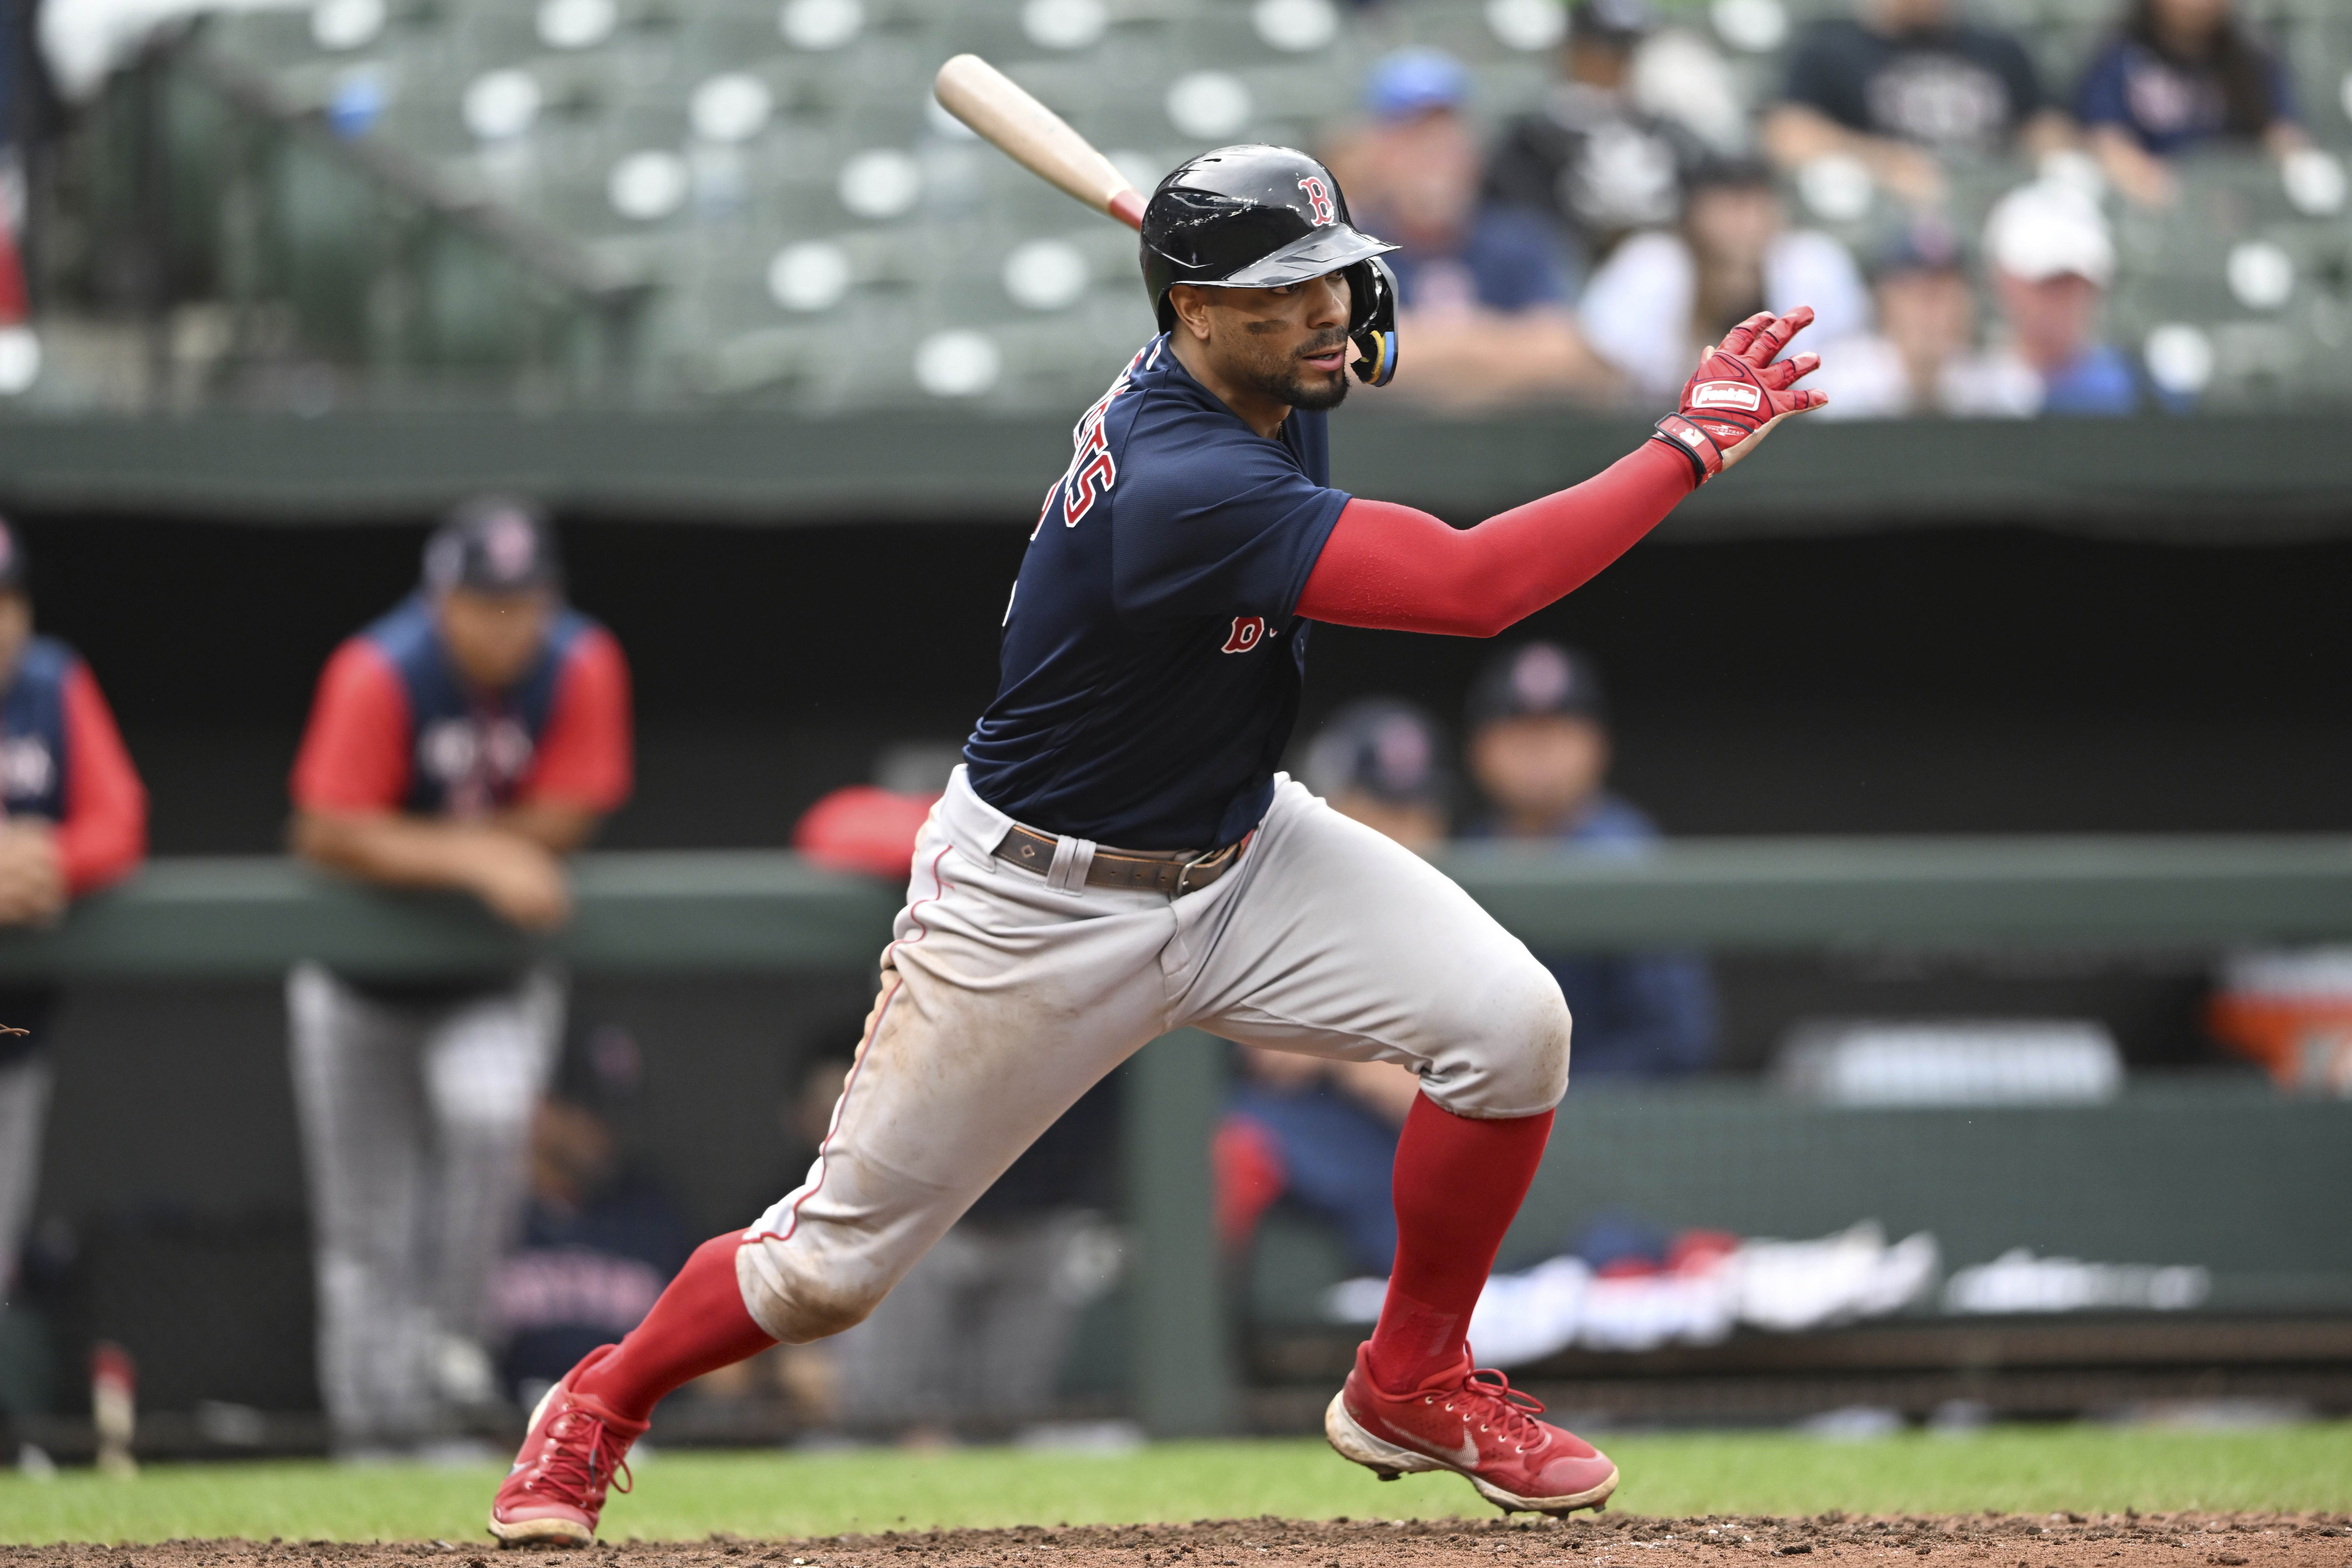 With one more hit, Xander Bogaerts will join an exclusive group of